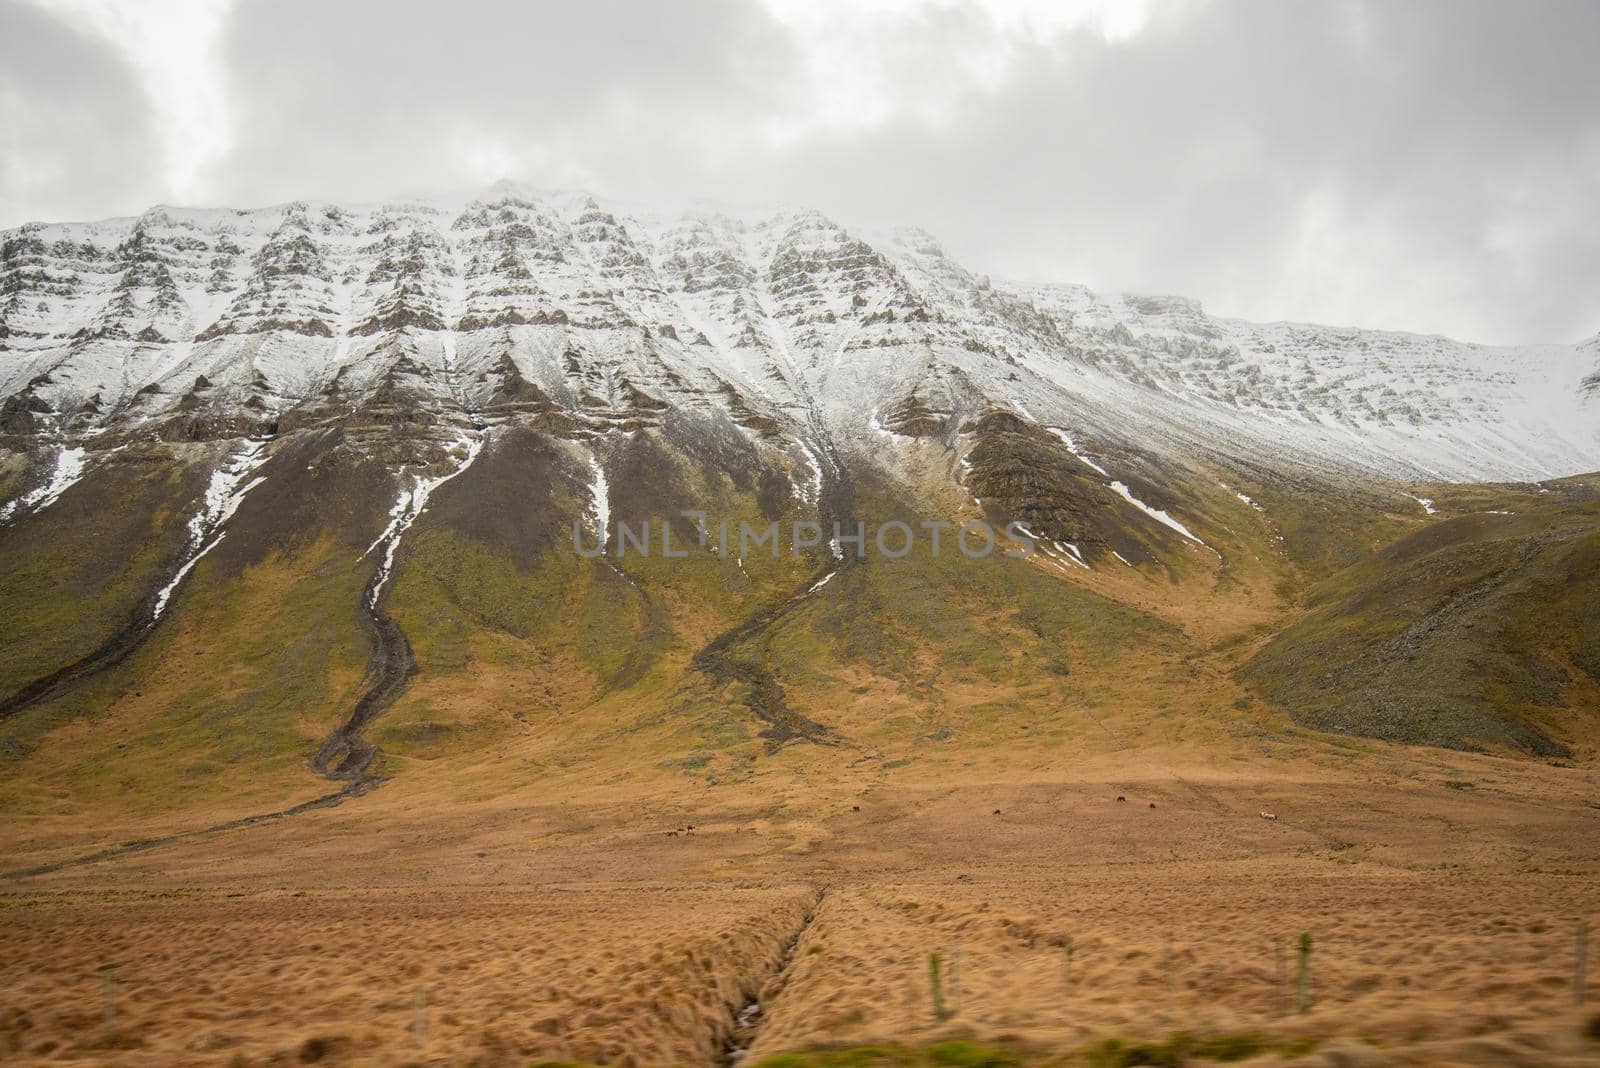 Snow helps illustrate the Icelandic mountain's unique texture and layers green brown grassy landscape below